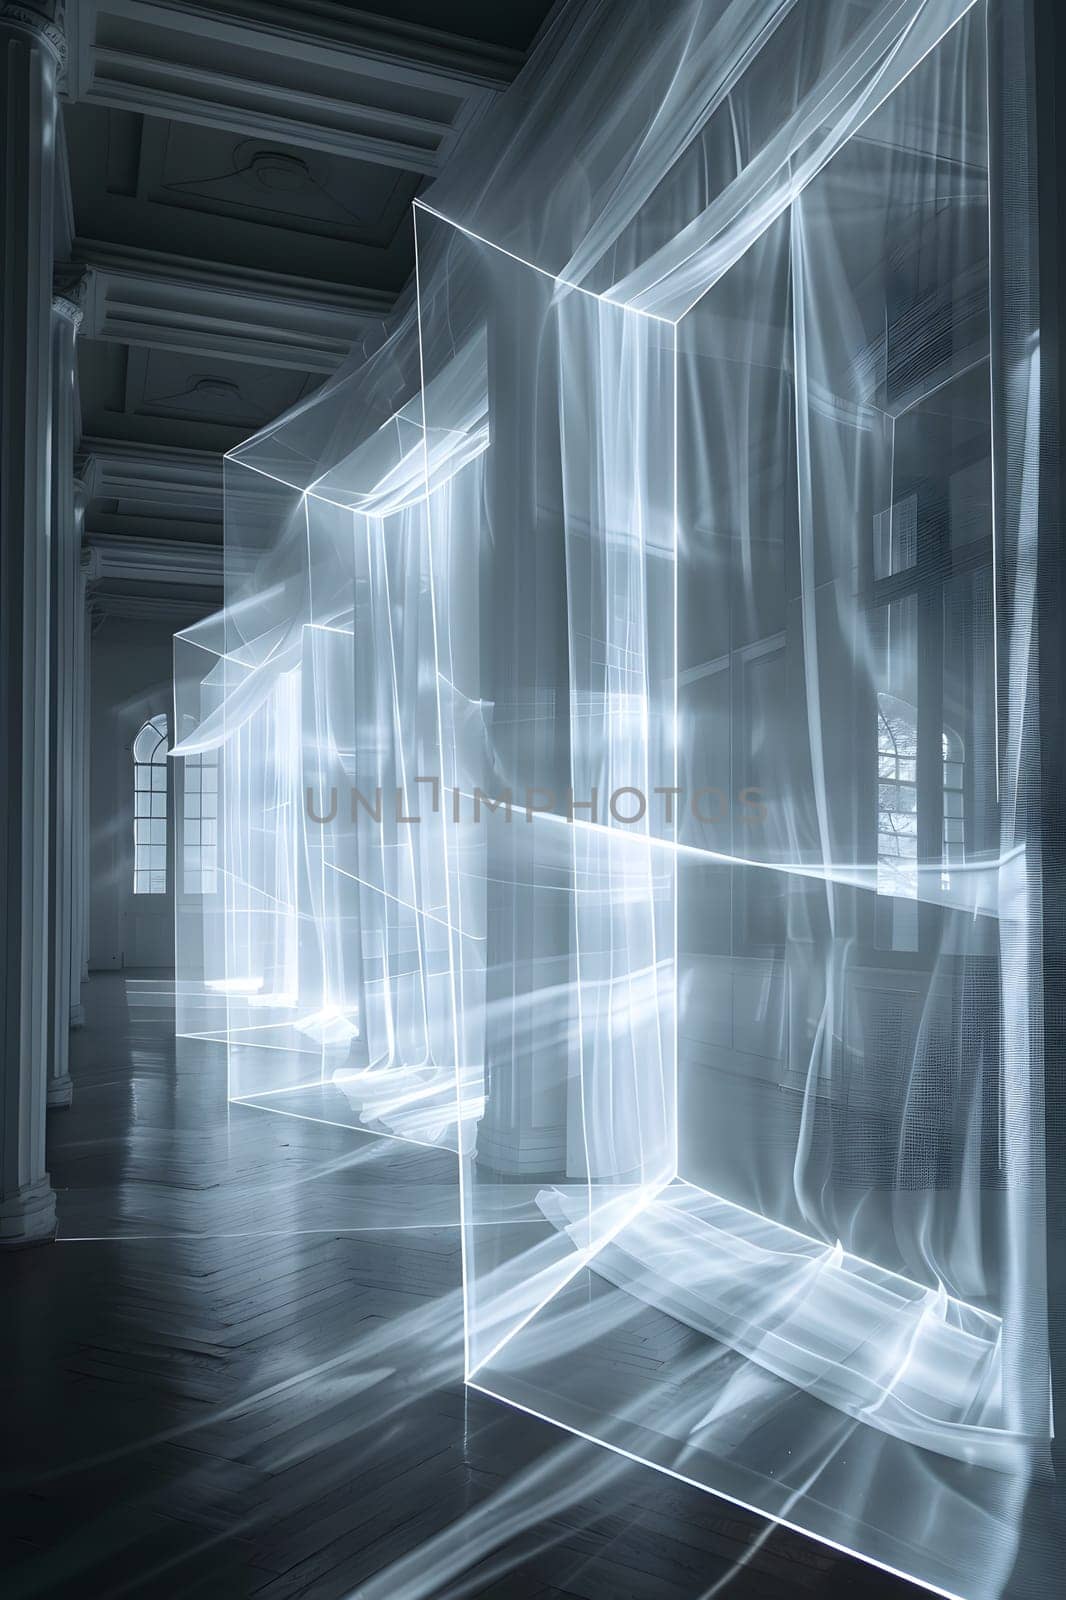 a long exposure photo of a hallway with a lot of lights coming out of the windows by Nadtochiy